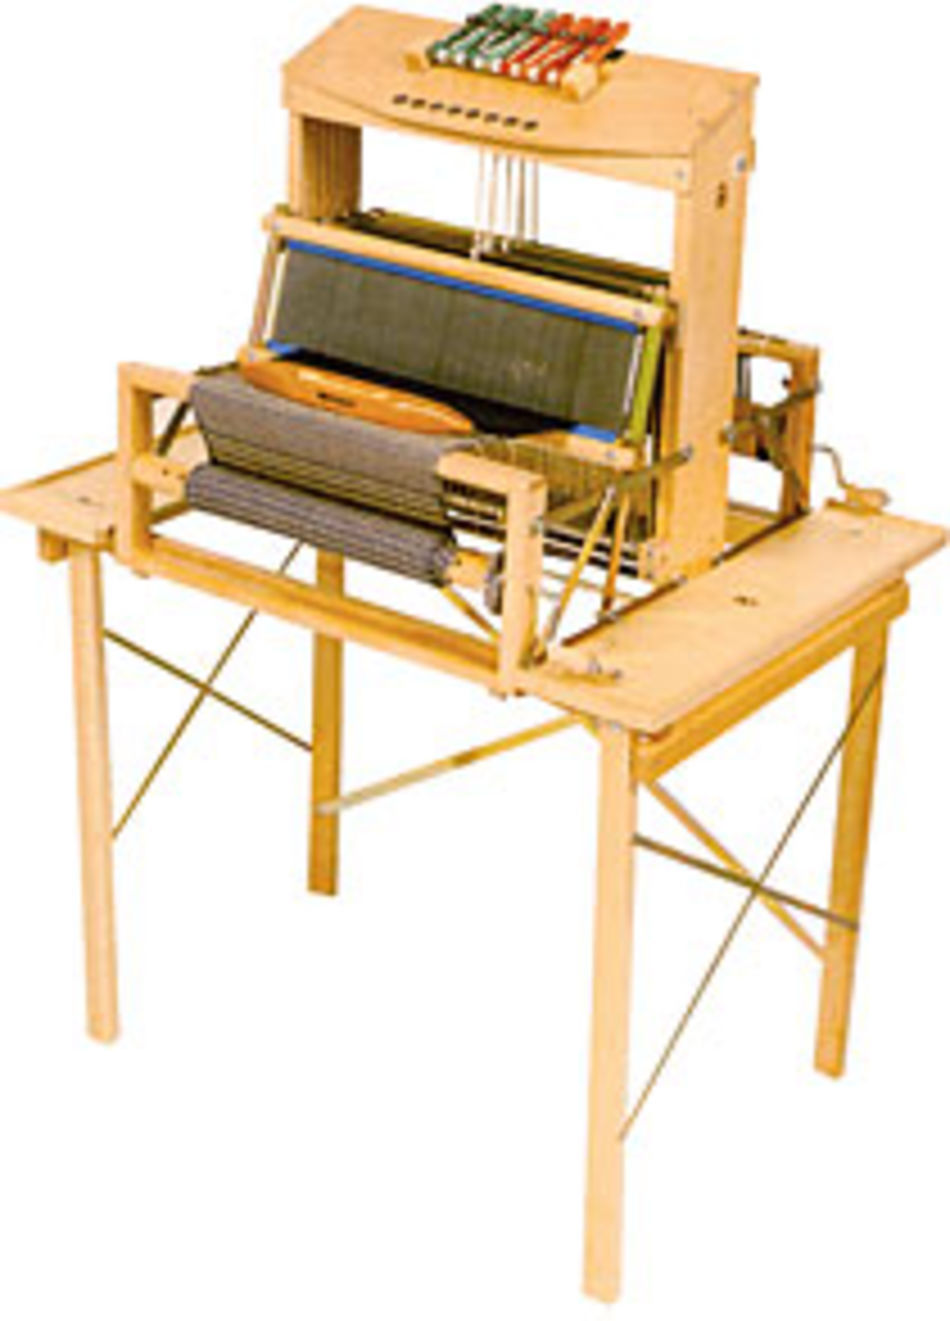 Weaving Equipment Leclerc Stand with Side Shelves for Dorothy or Voyageur 15 34quot 4 or 8 Shaft Table Loom no treadles